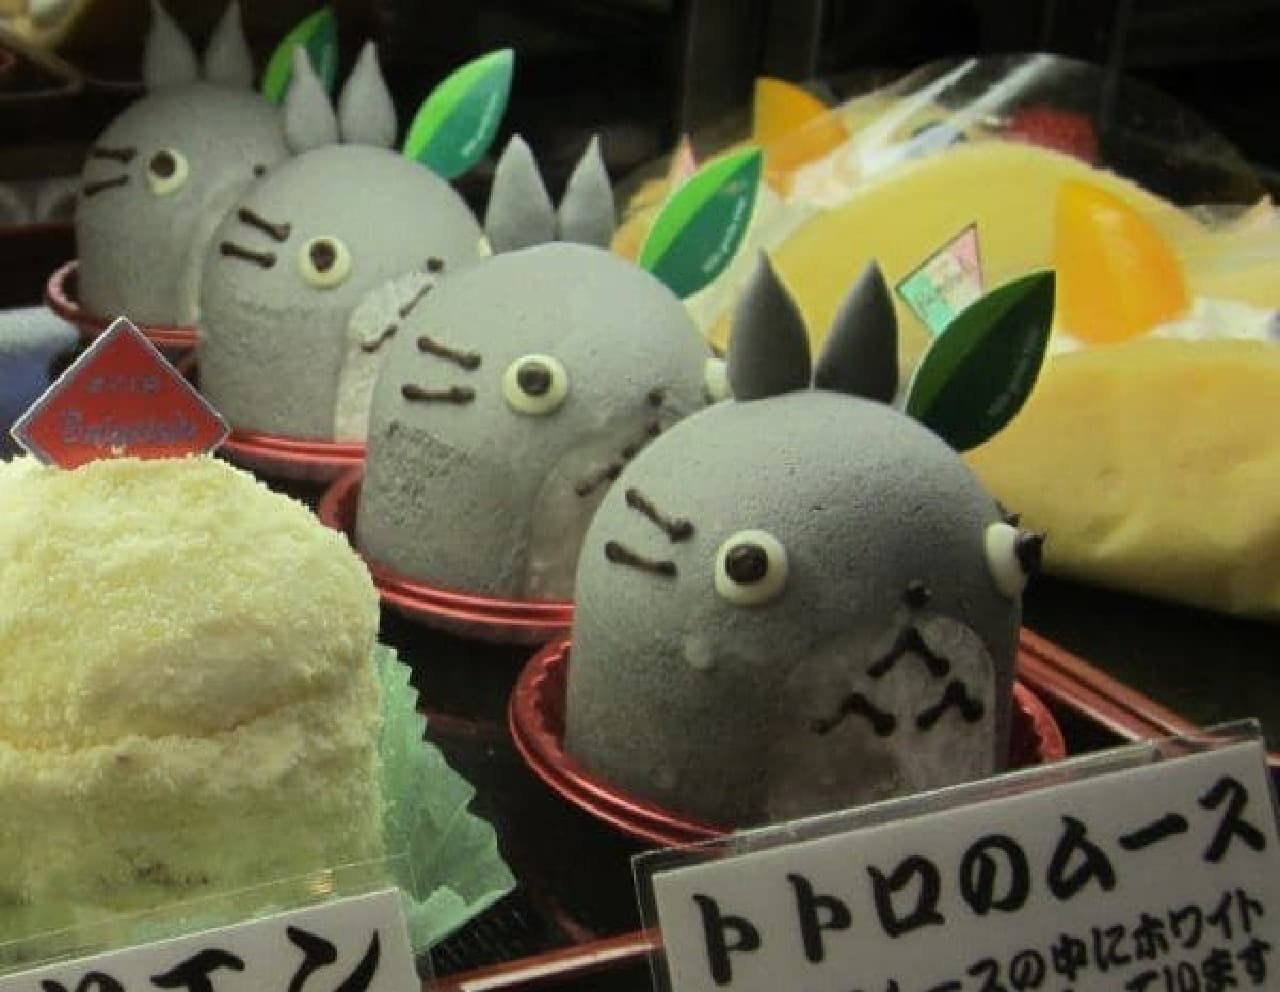 I also found a cake that looks exactly like Totoro